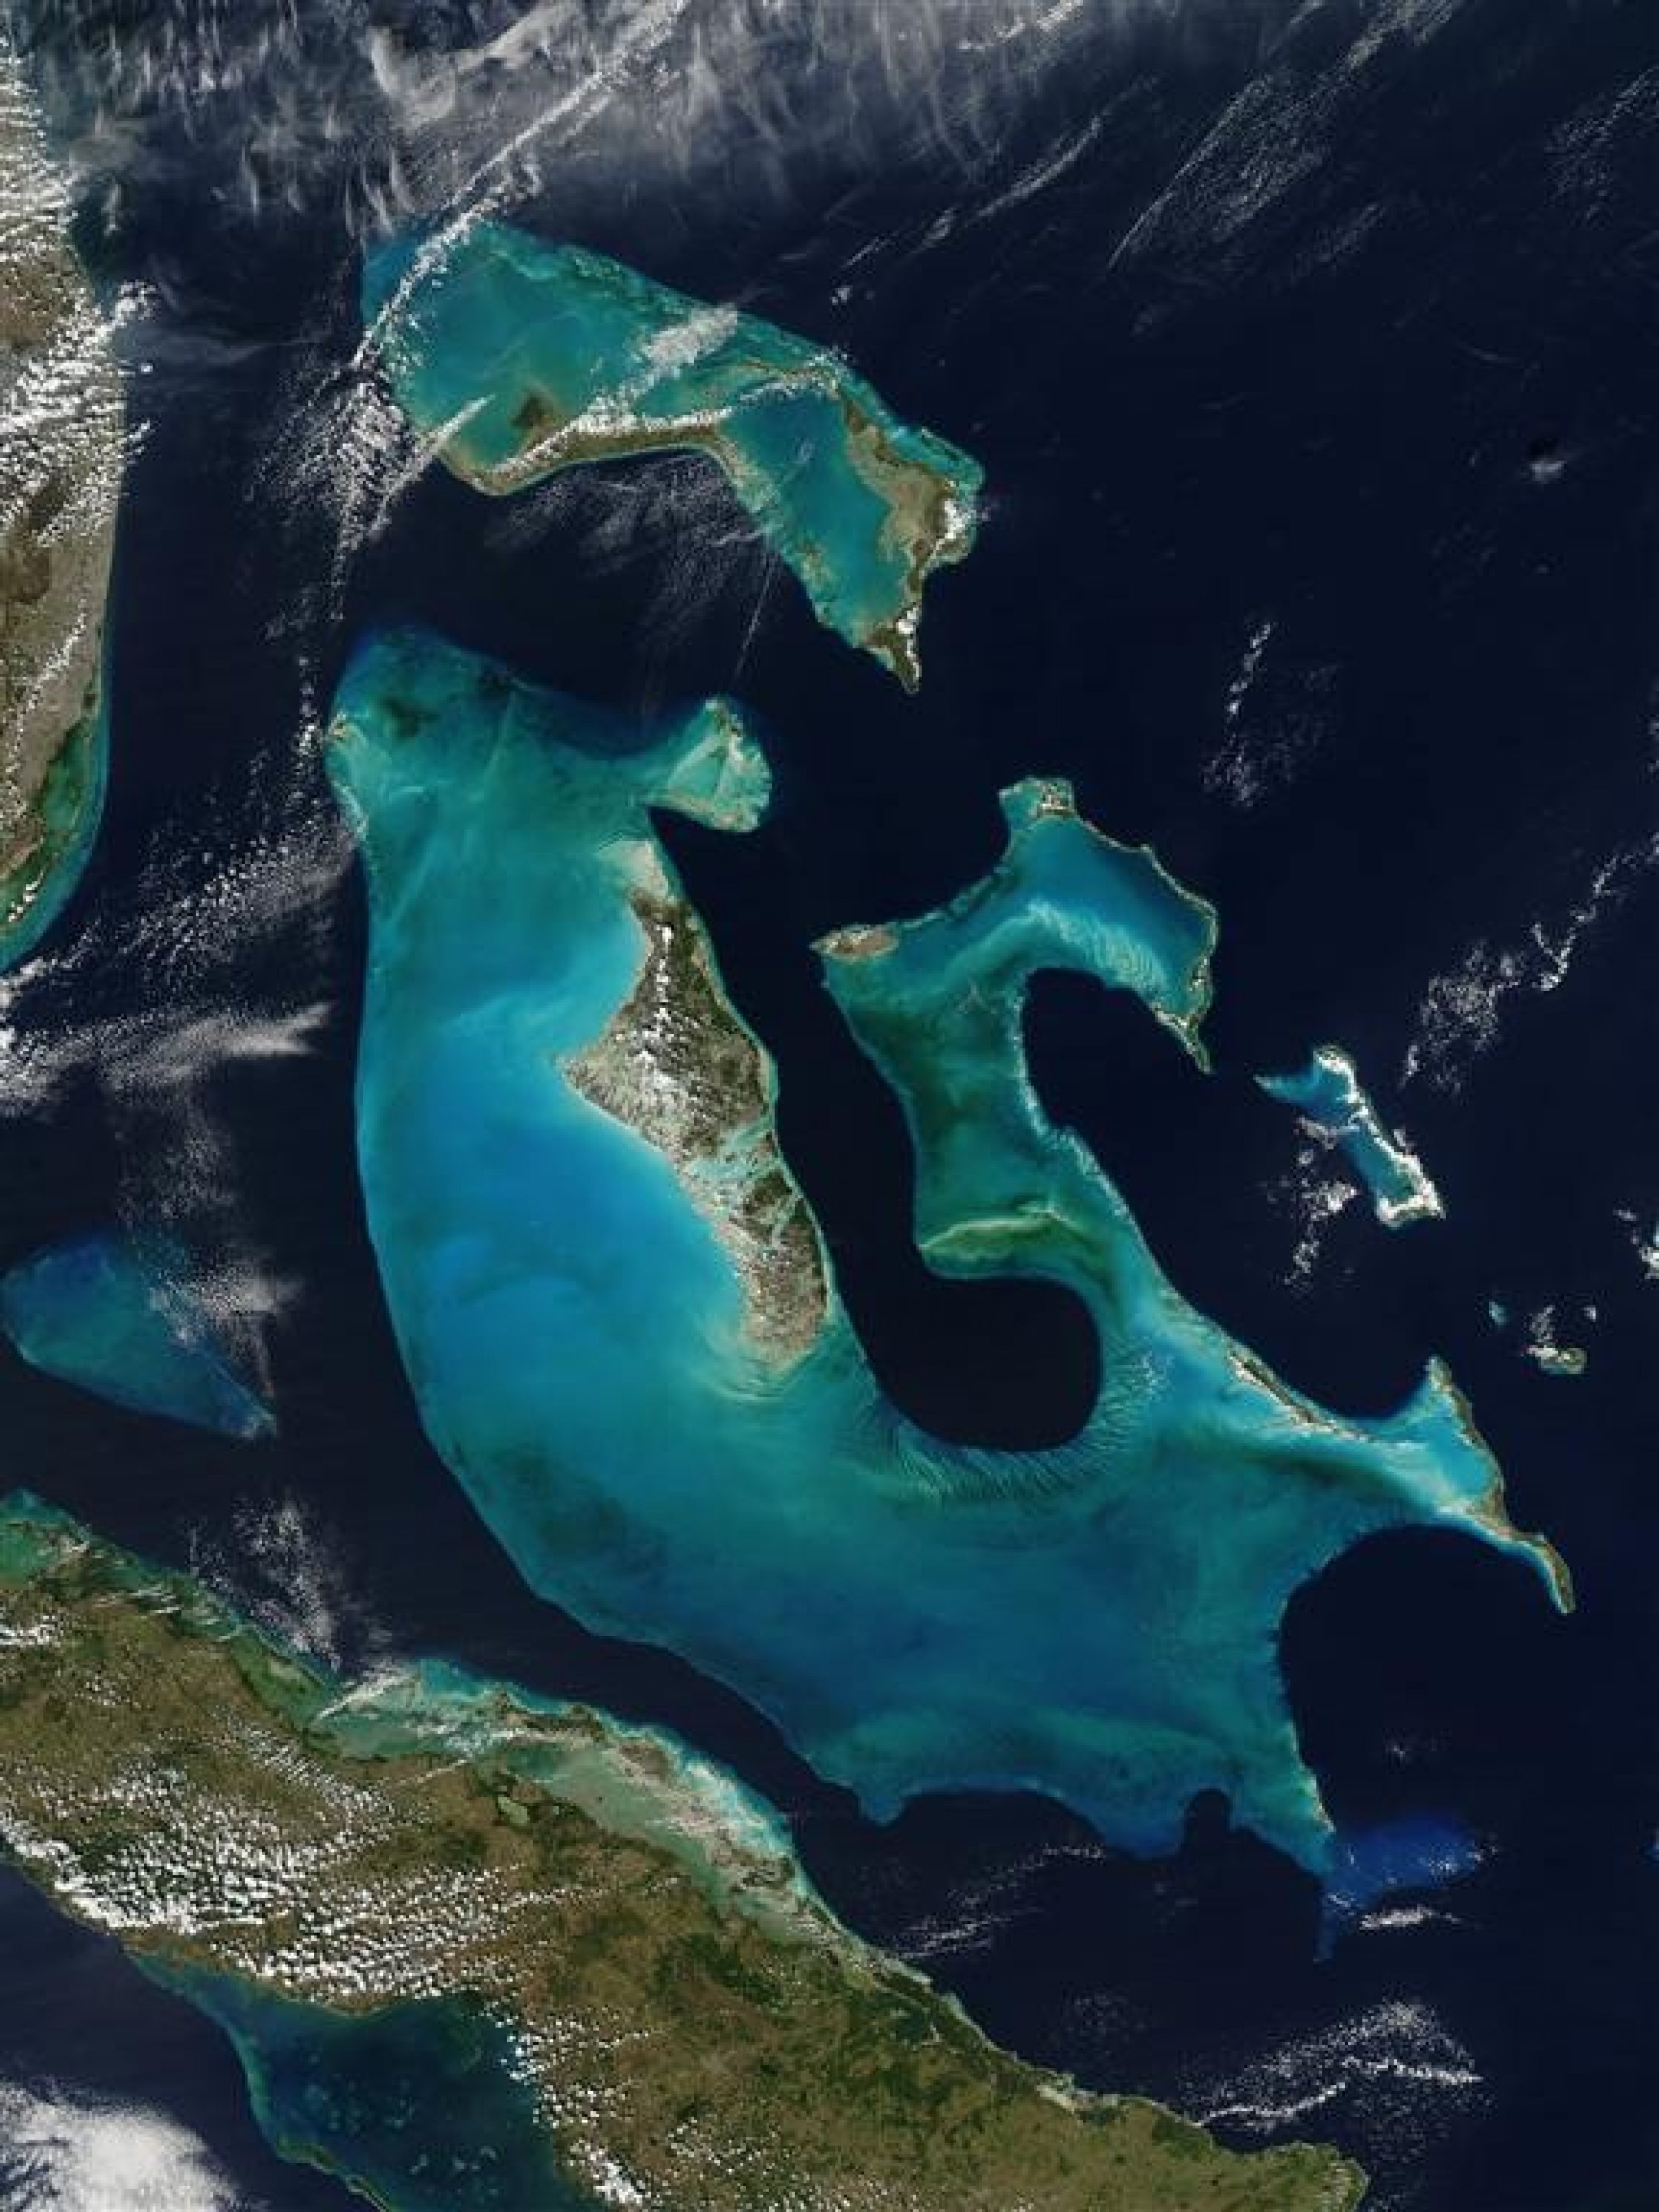 Shallow waters encircling the reefs of the Bahamas